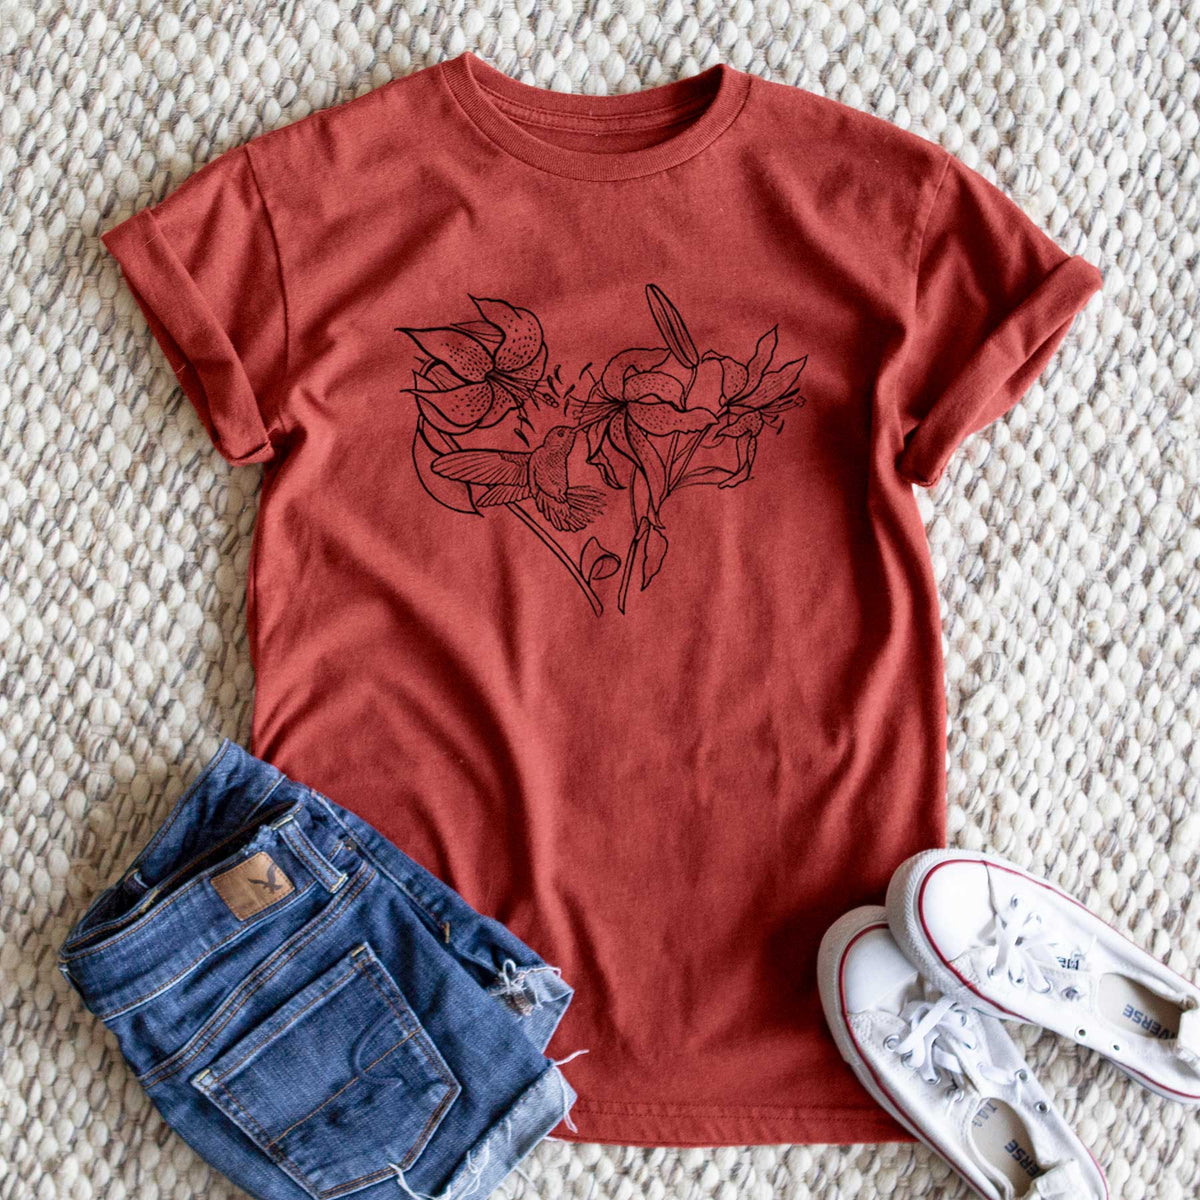 Hummingbird with Lillies Heart - Unisex Recycled Eco Tee  - CLOSEOUT - FINAL SALE